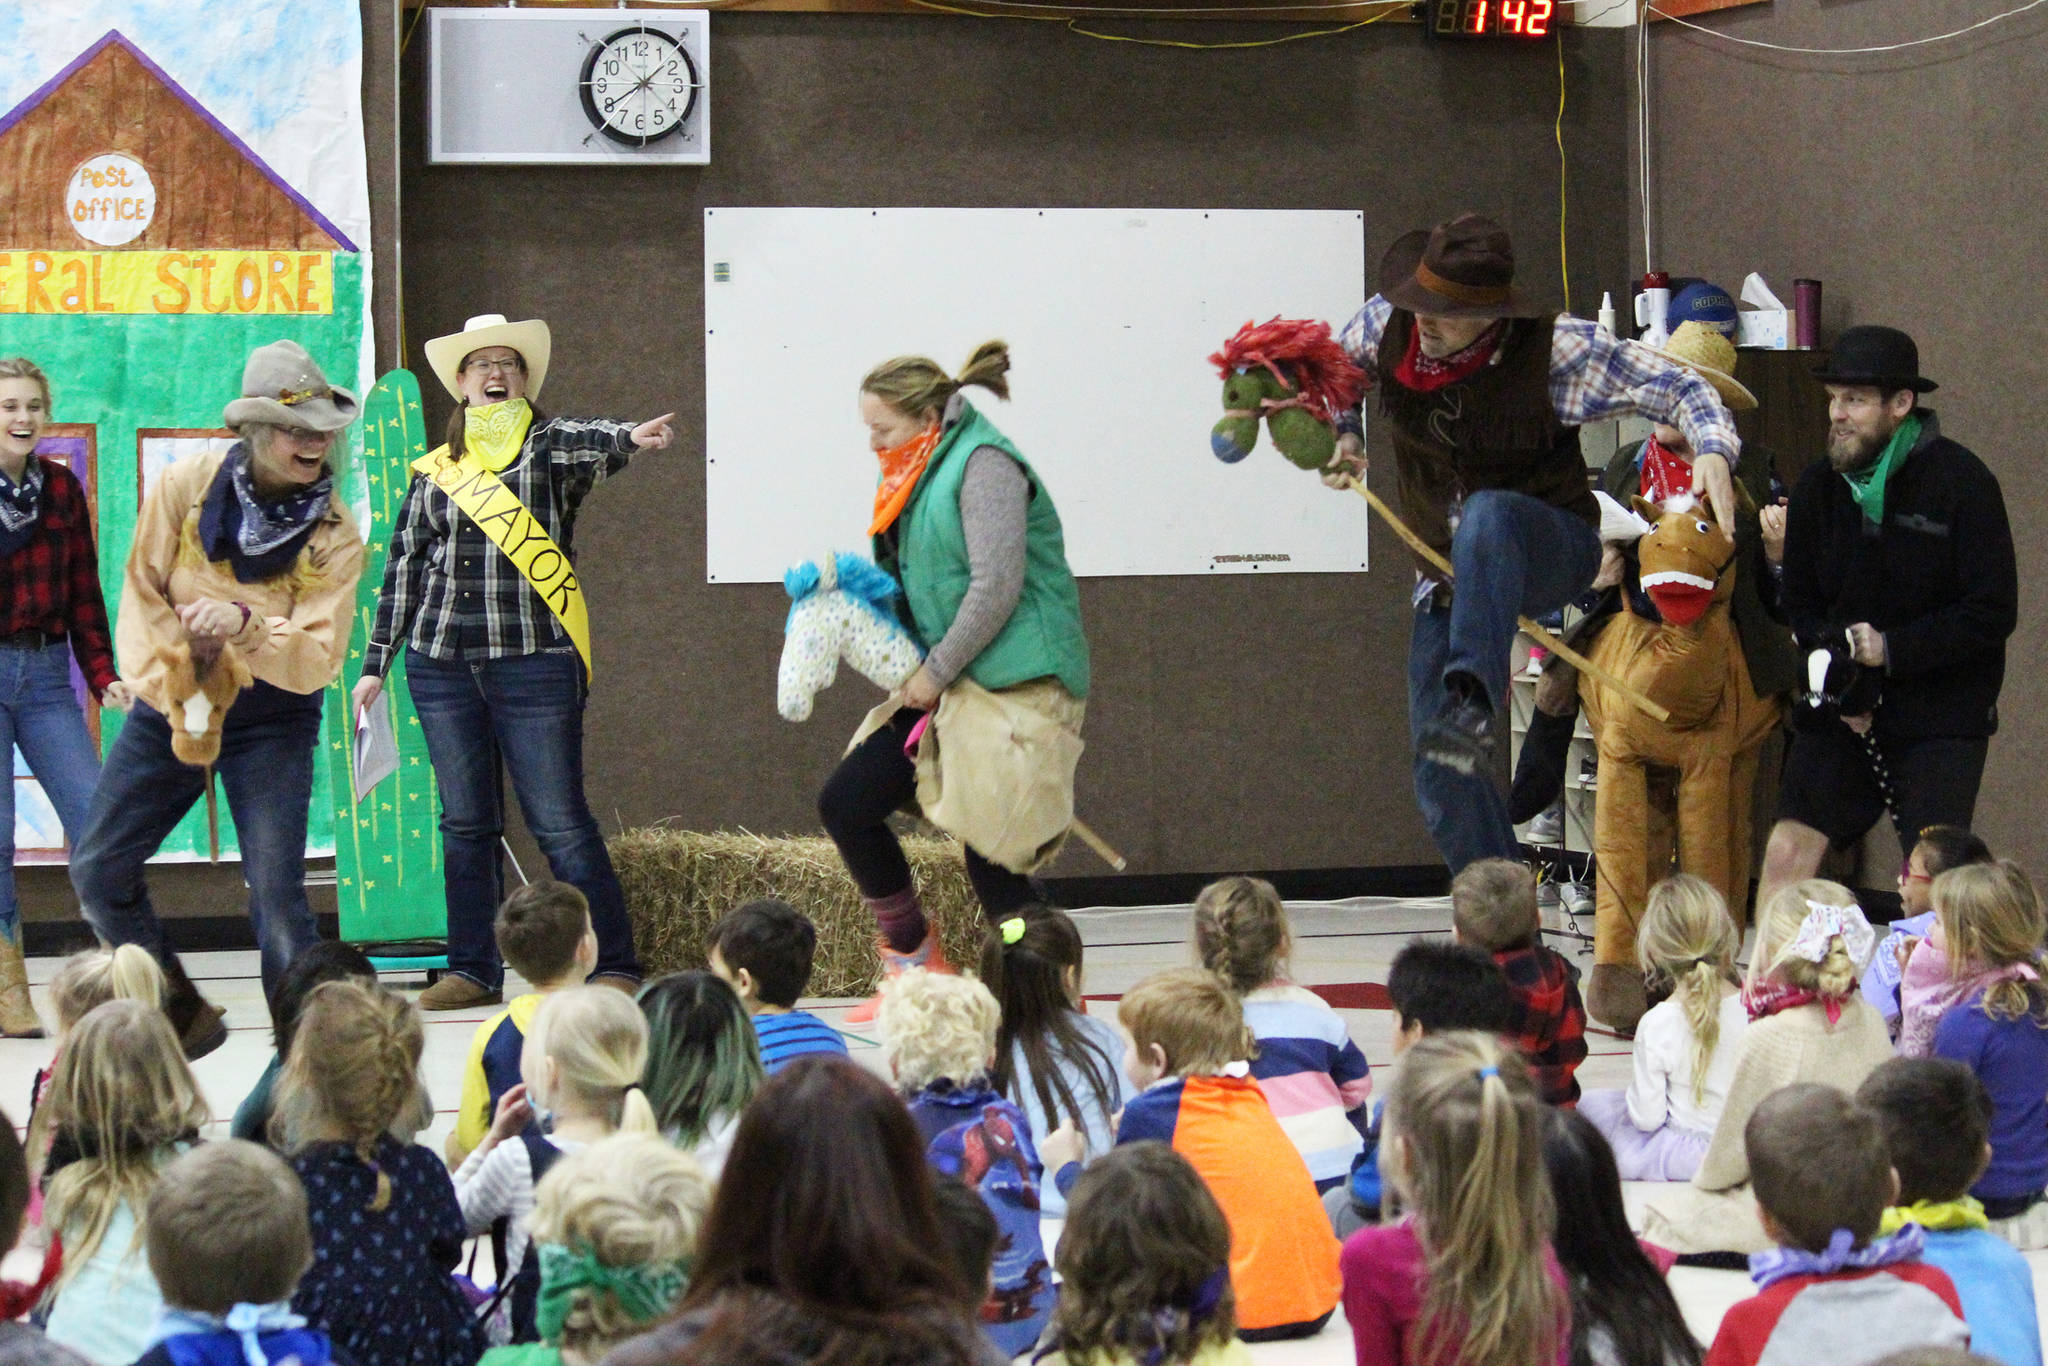 A group of teachers rush into the gym at Paul Banks Elementary School pretending to be a posse chasing down bandits during an assembly celebrating the start of the annual Read-A-Thon on Feb. 3, 2020 at the school in Homer, Alaska. The theme of this year’s celebratory skit was the wild west. (Photo by Megan Pacer/Homer News)